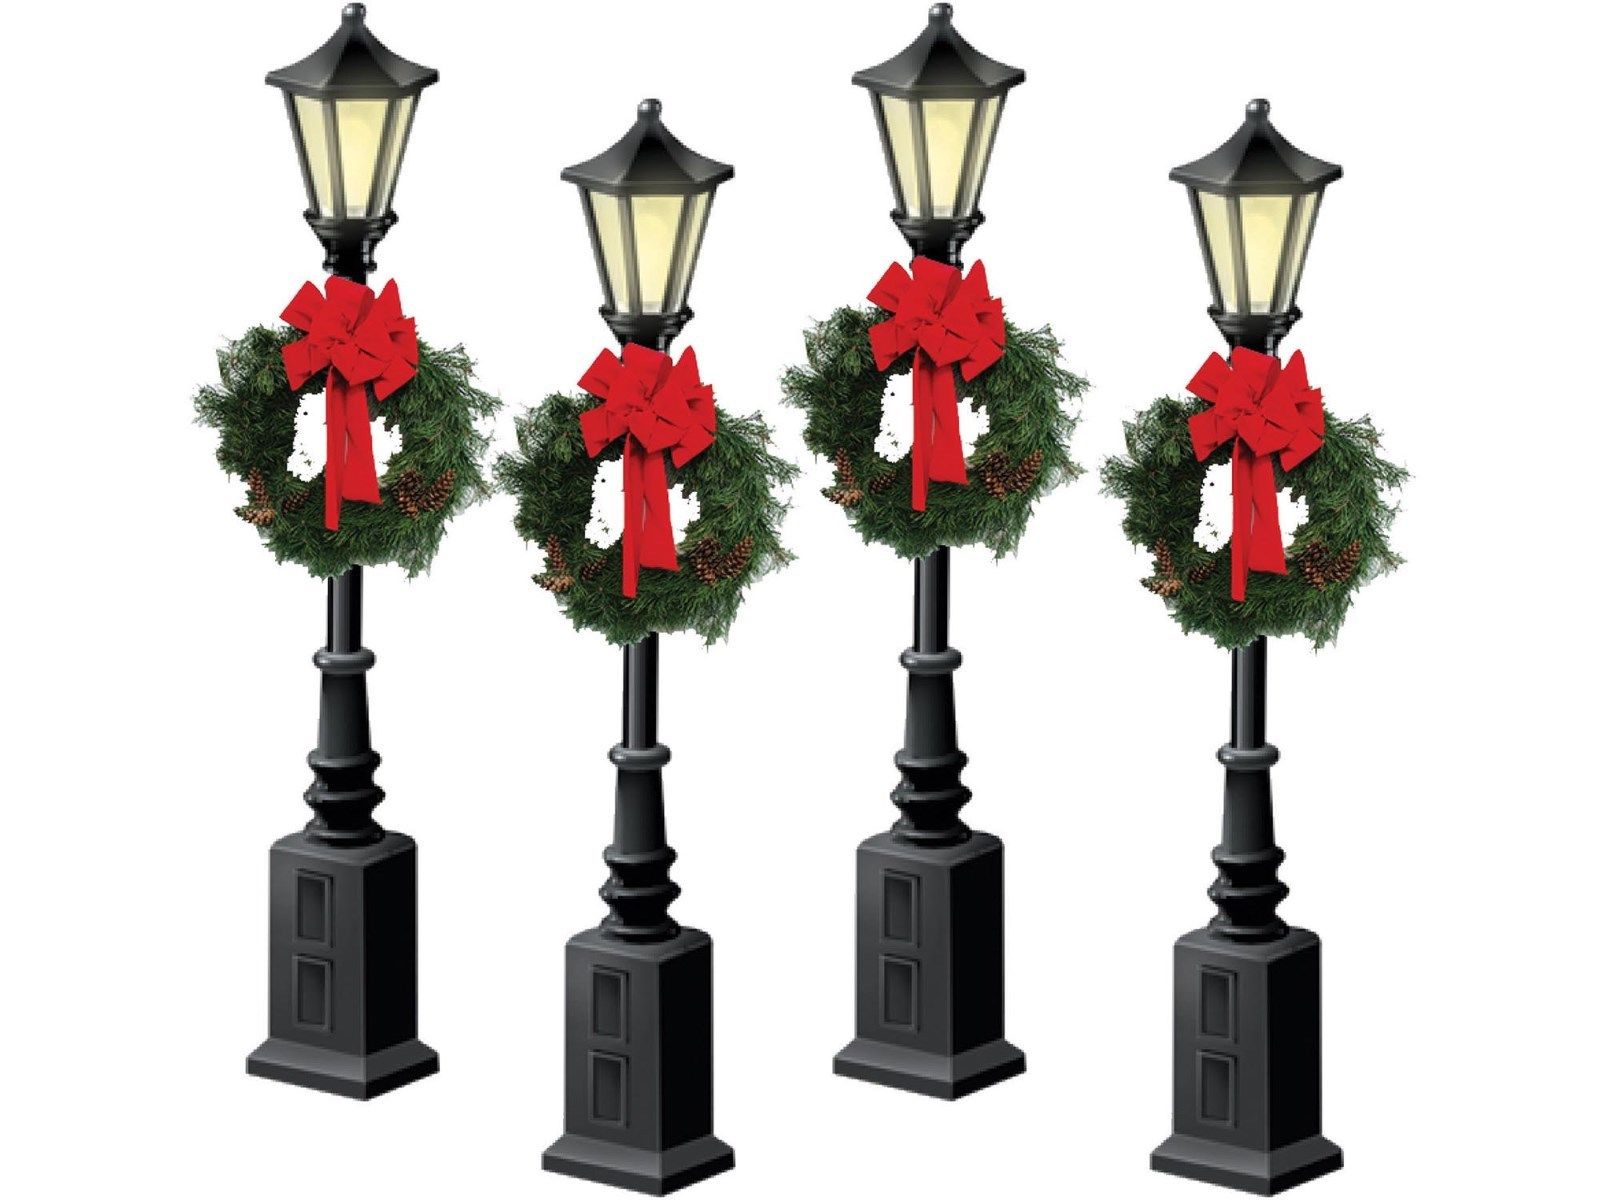 Lionel Christmas Street Lamps With Wreaths 6-37907 | eBay